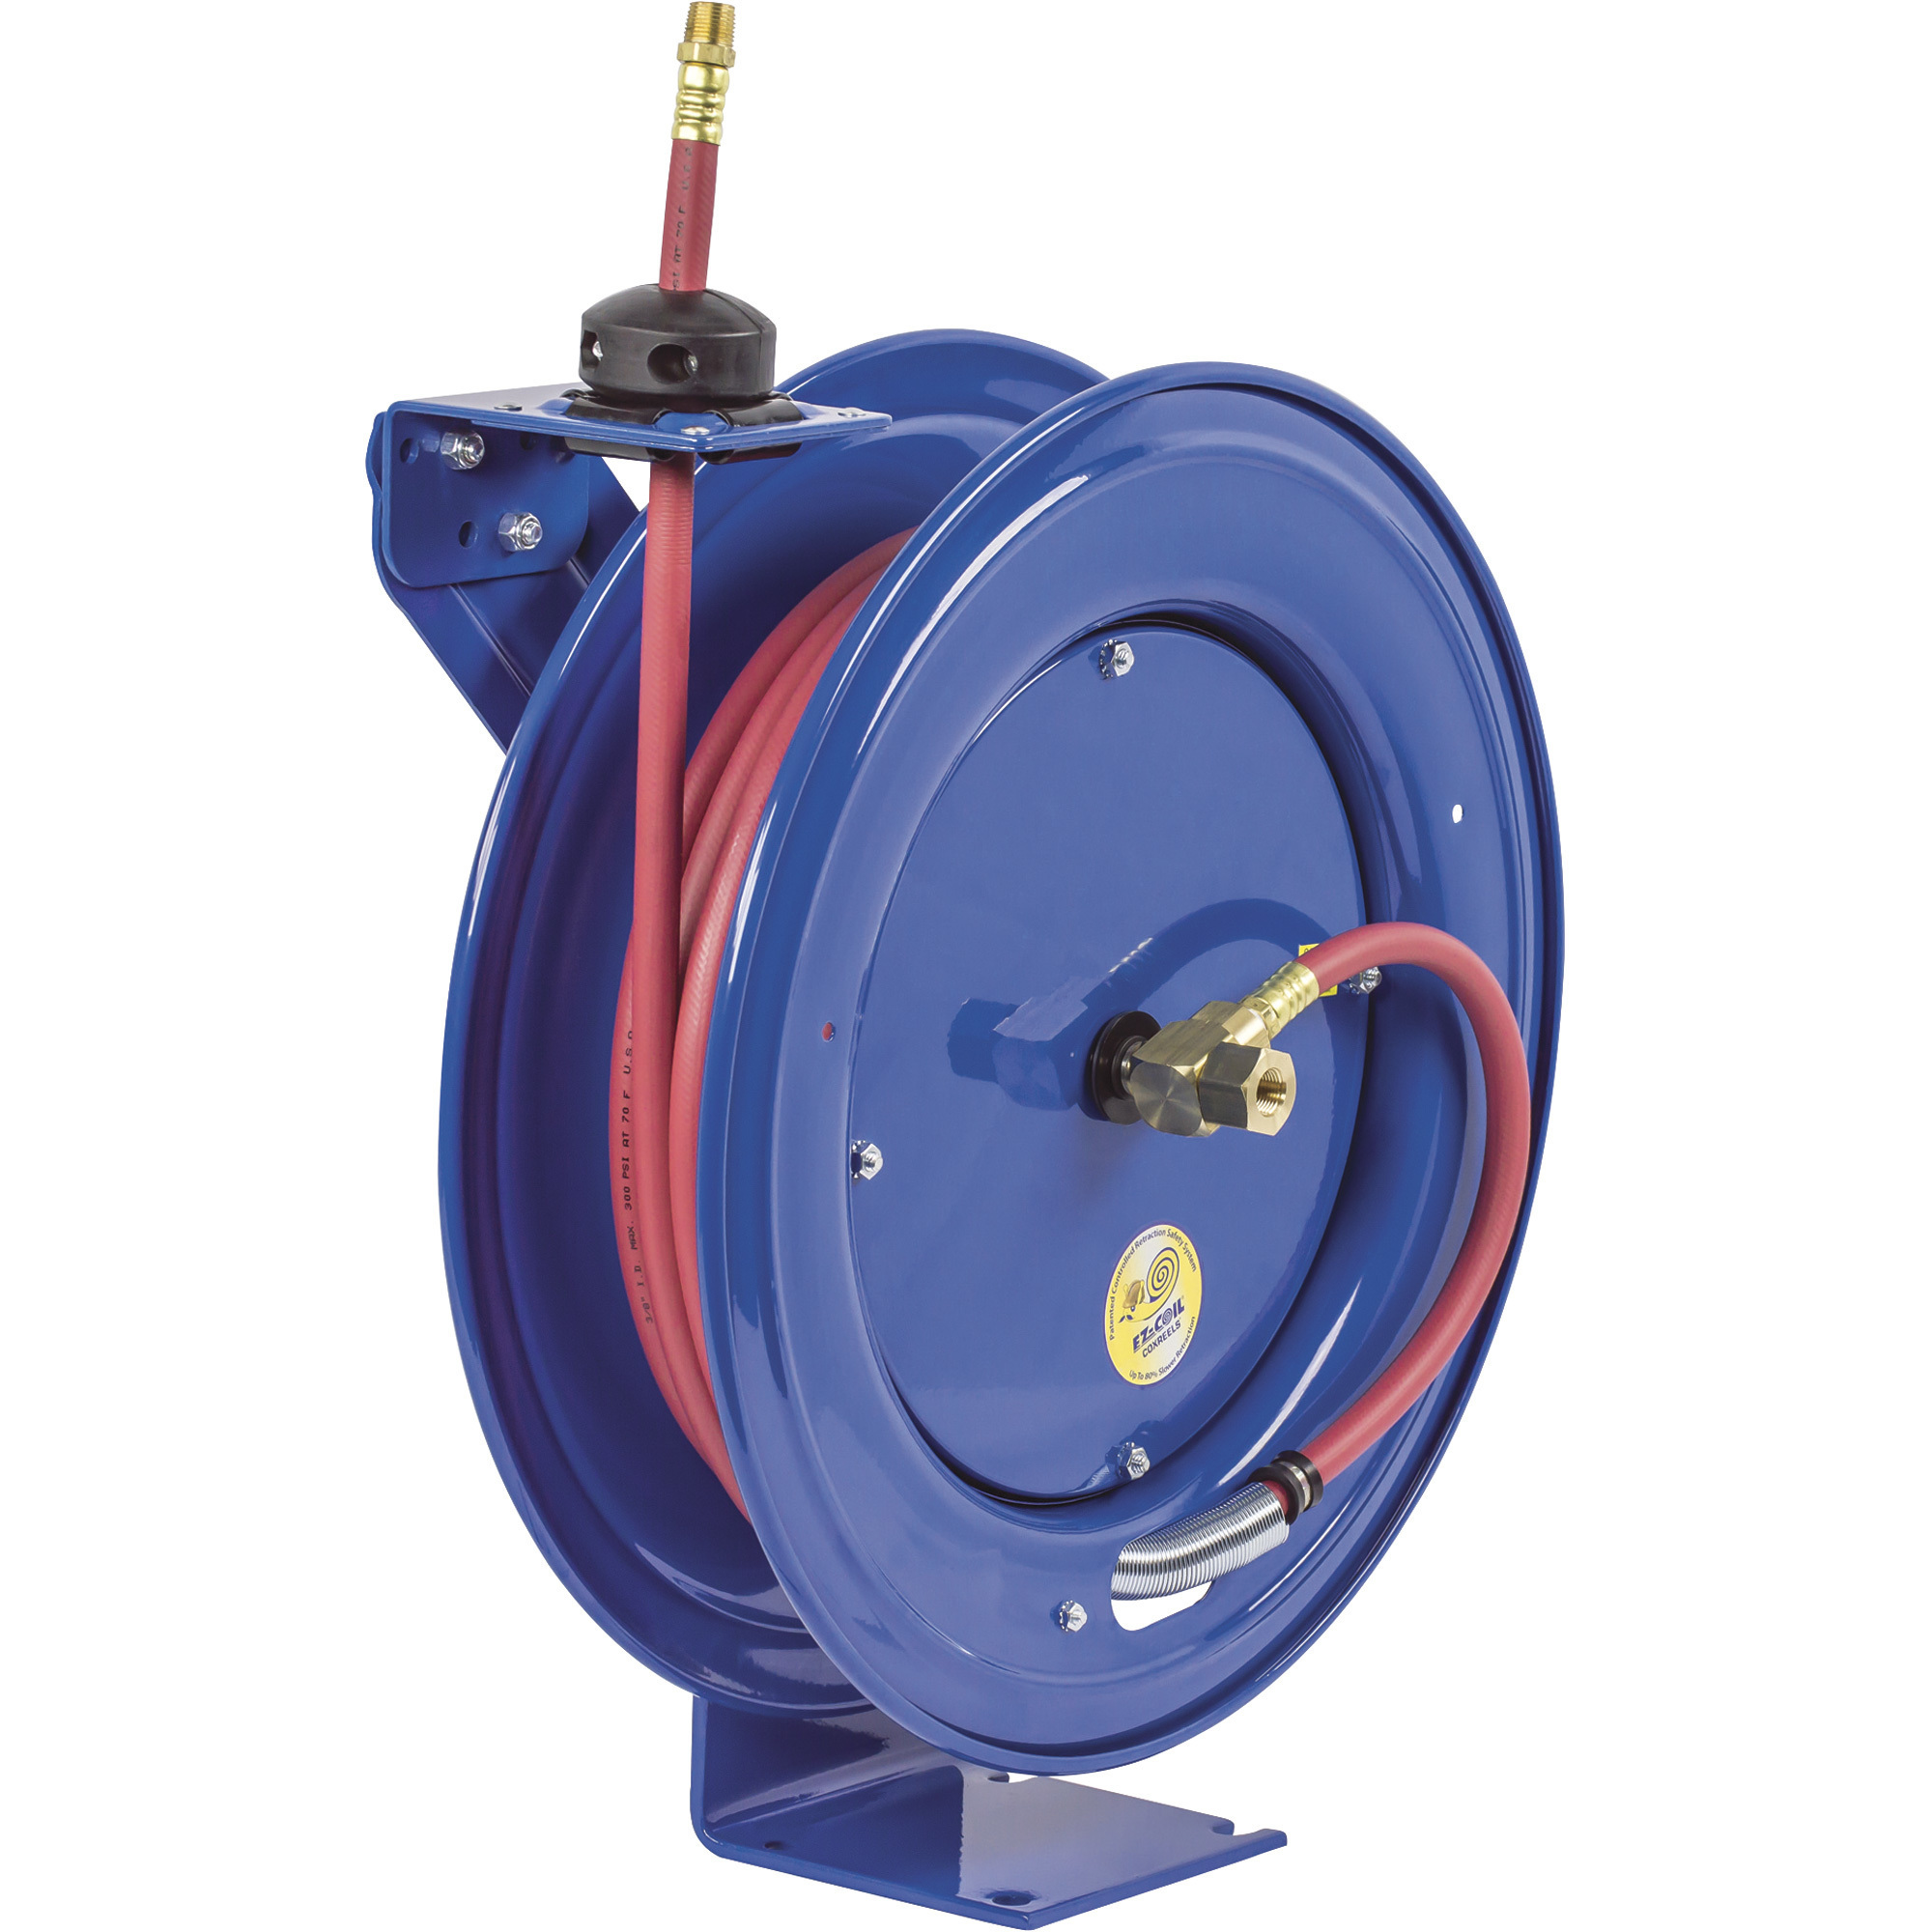 Coxreels Heavy-Duty Safety Air/Water Hose Reel, With 3/8Inch x 75ft. PVC Hose, Max. 300 PSI, Model EZ-SH-375